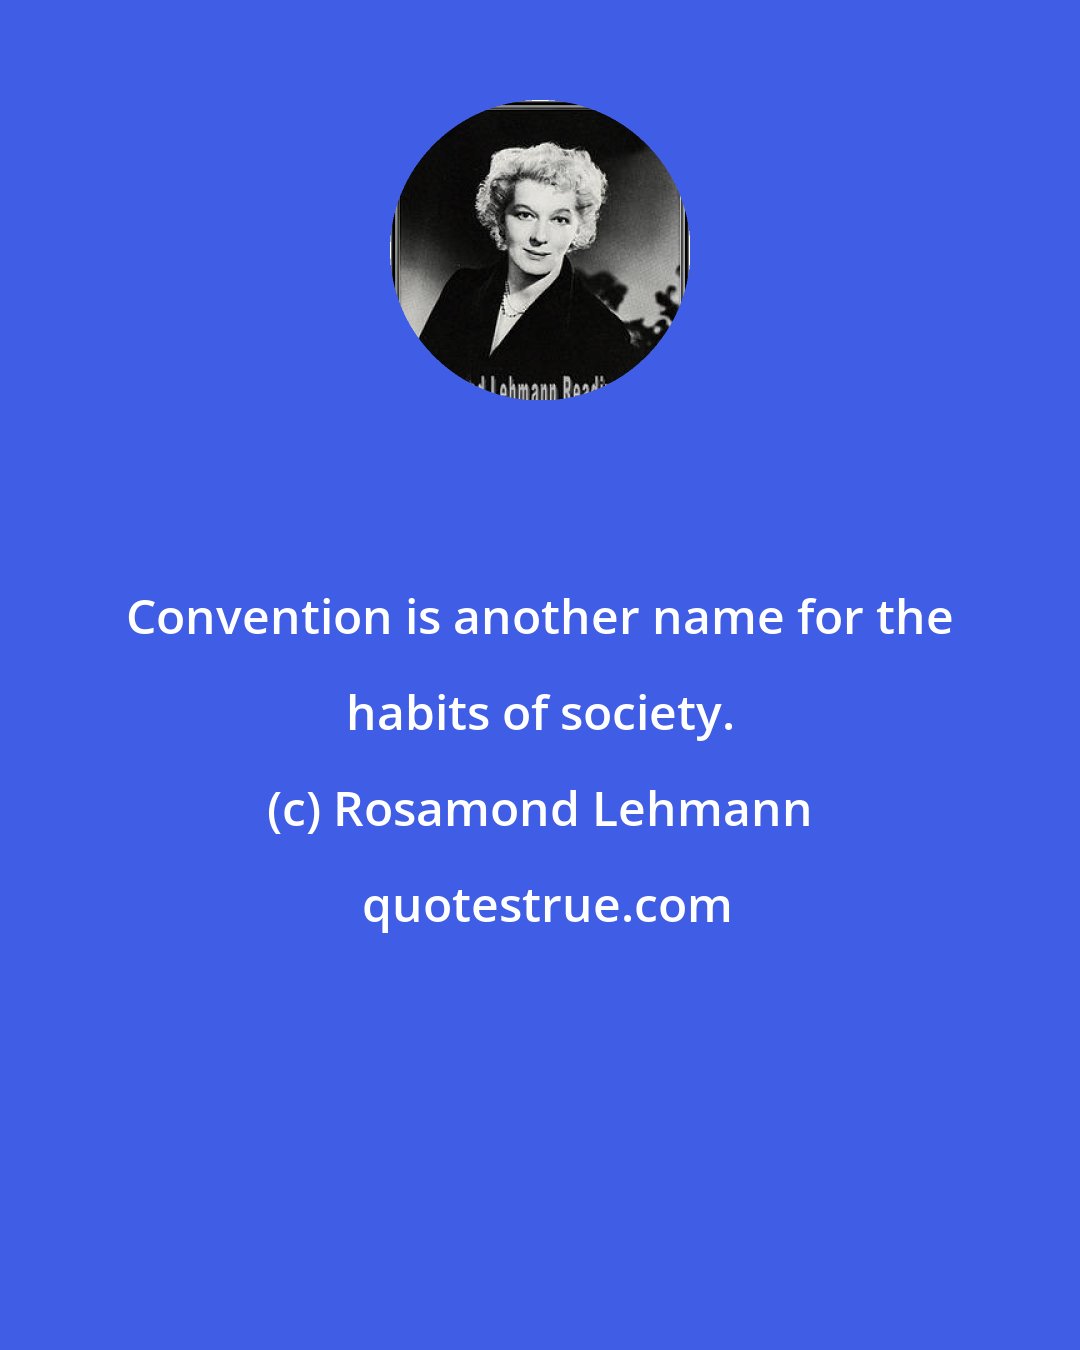 Rosamond Lehmann: Convention is another name for the habits of society.